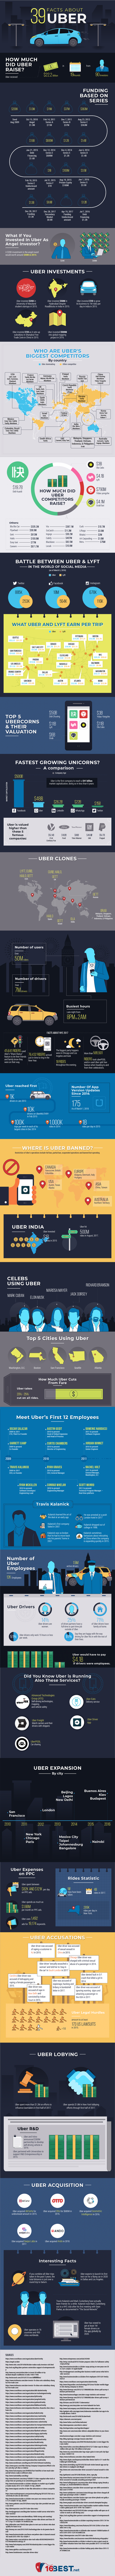 facts about Uber